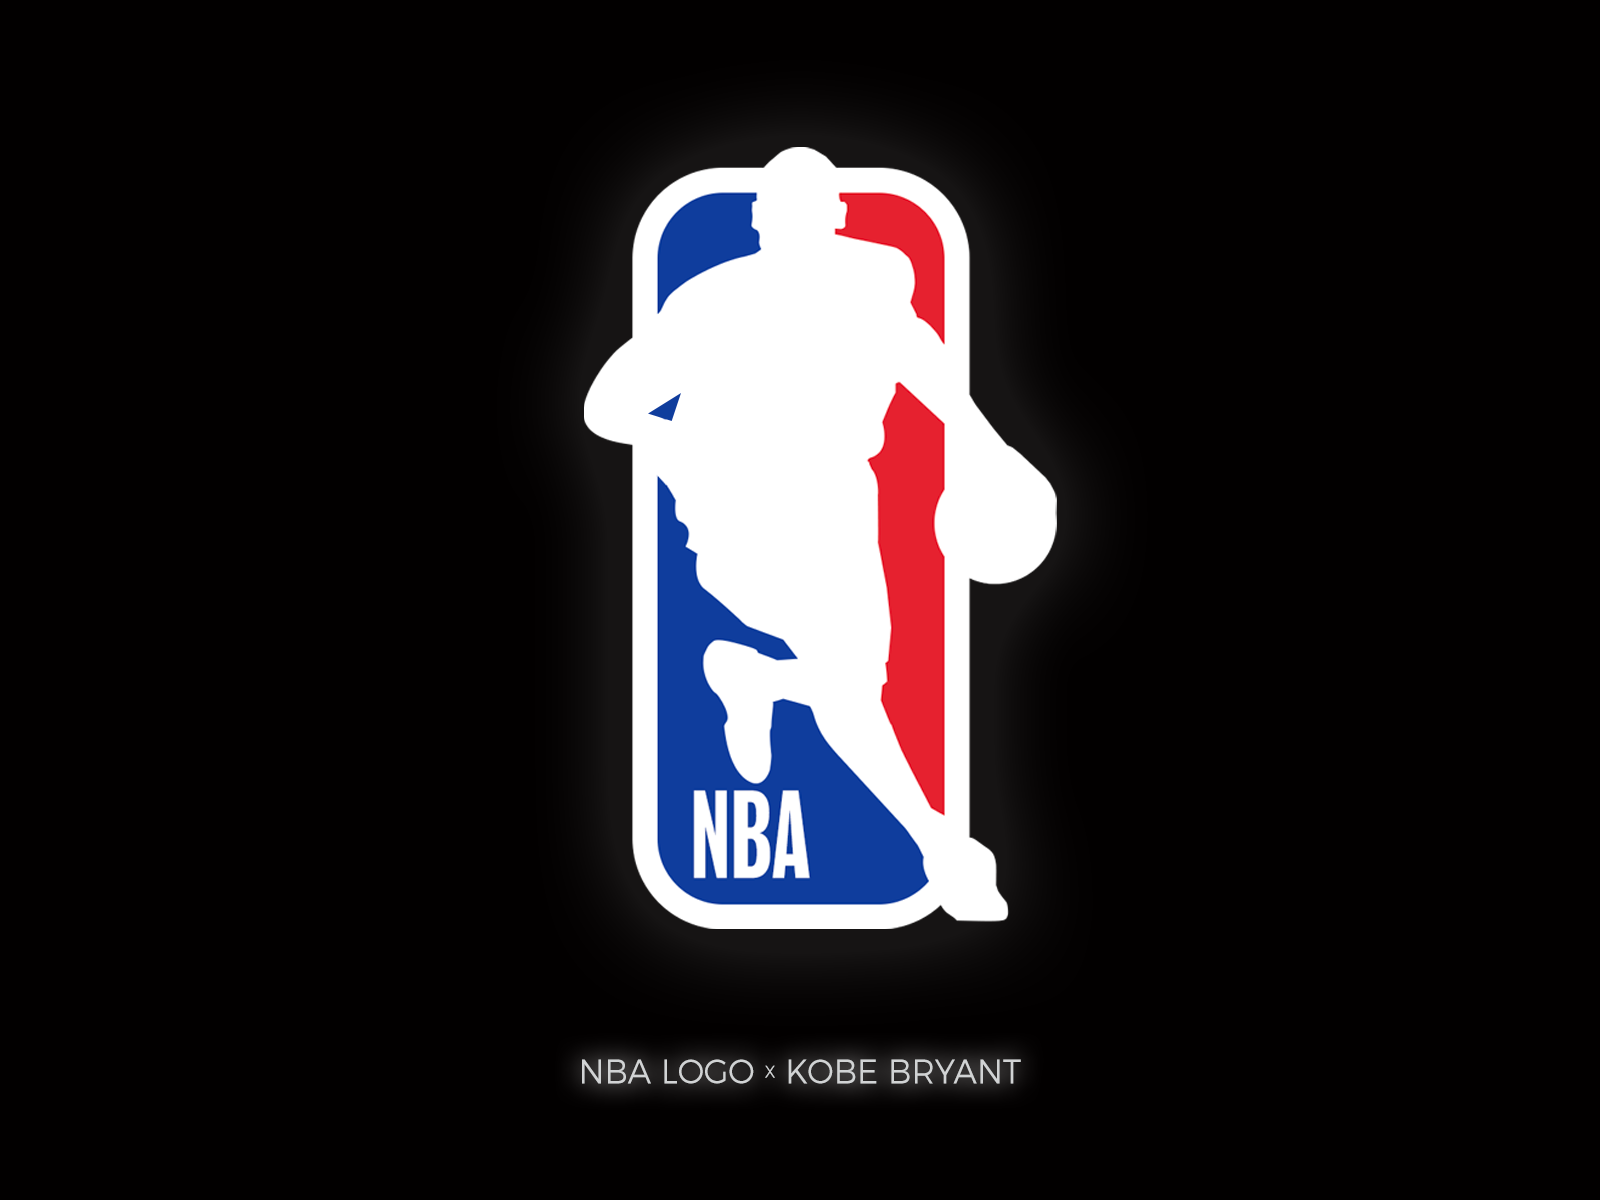 Nba Logo - Players Millions Of Fans Like Idea Of Changing Nba Logo To